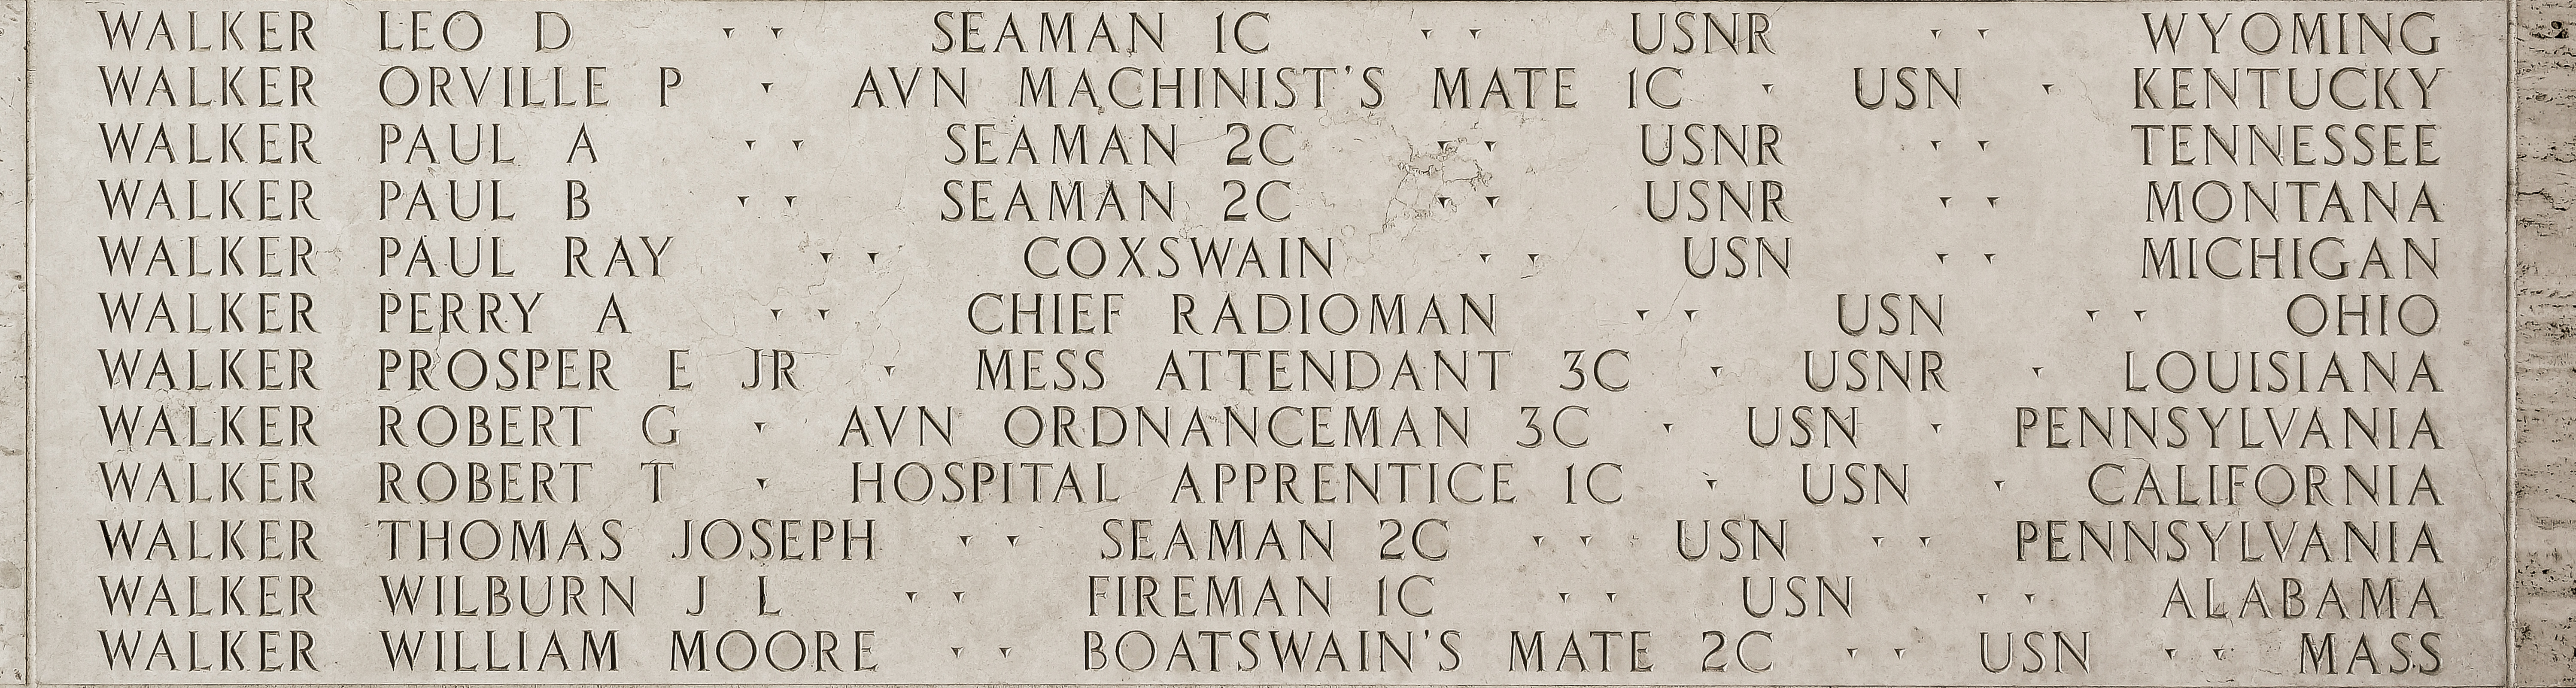 William Moore Walker, Boatswain's Mate Second Class